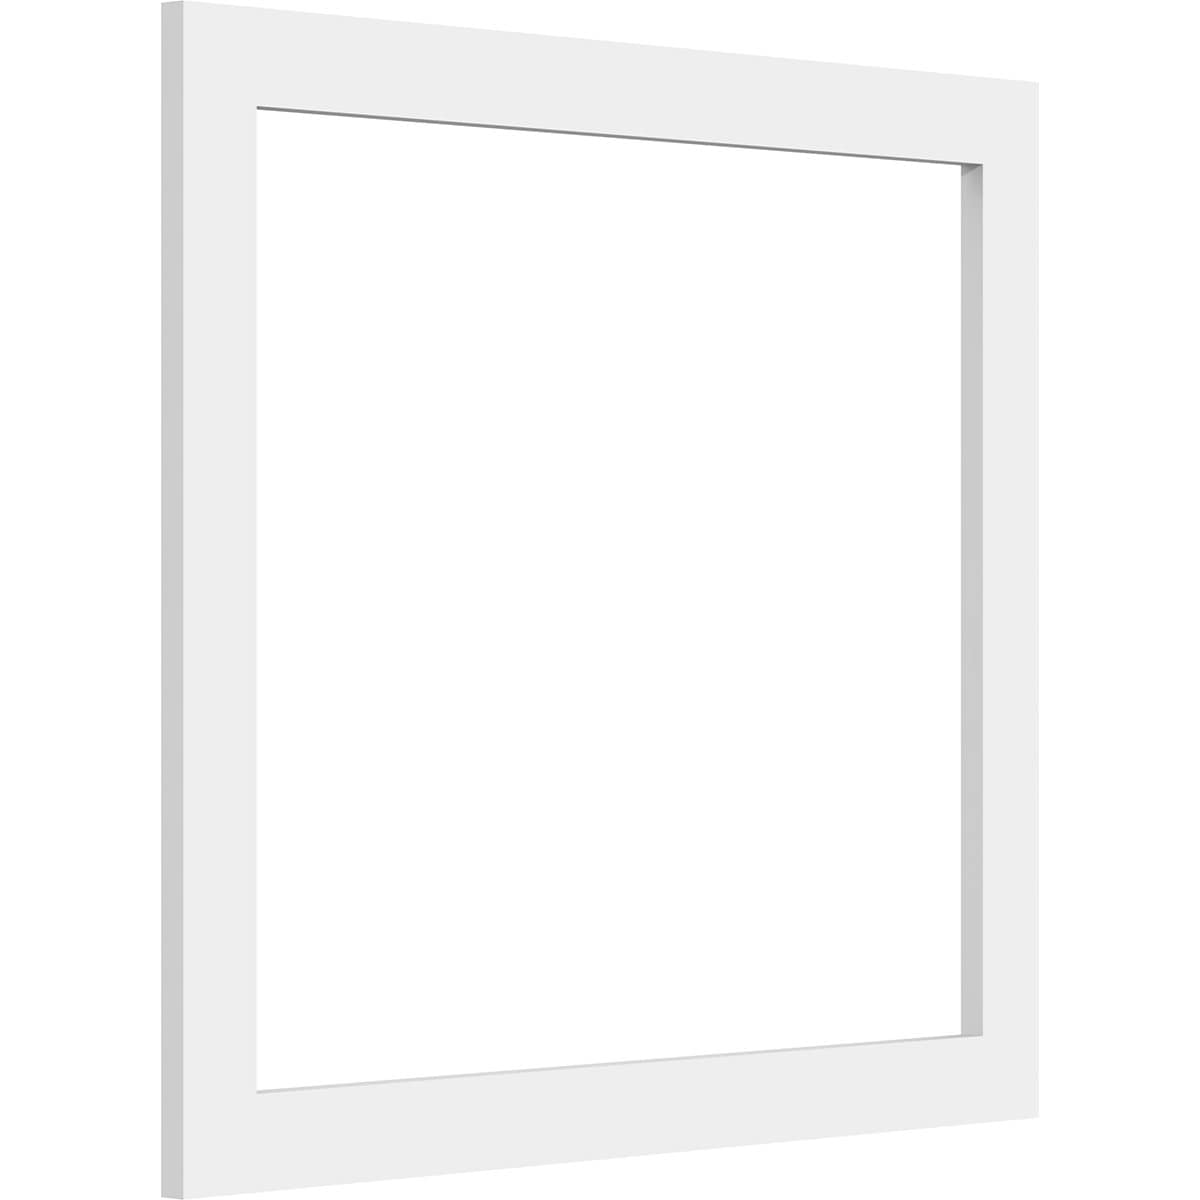 Ekena Millwork 20-in x 18-in Smooth White PVC Fretwork Wall Panel in ...